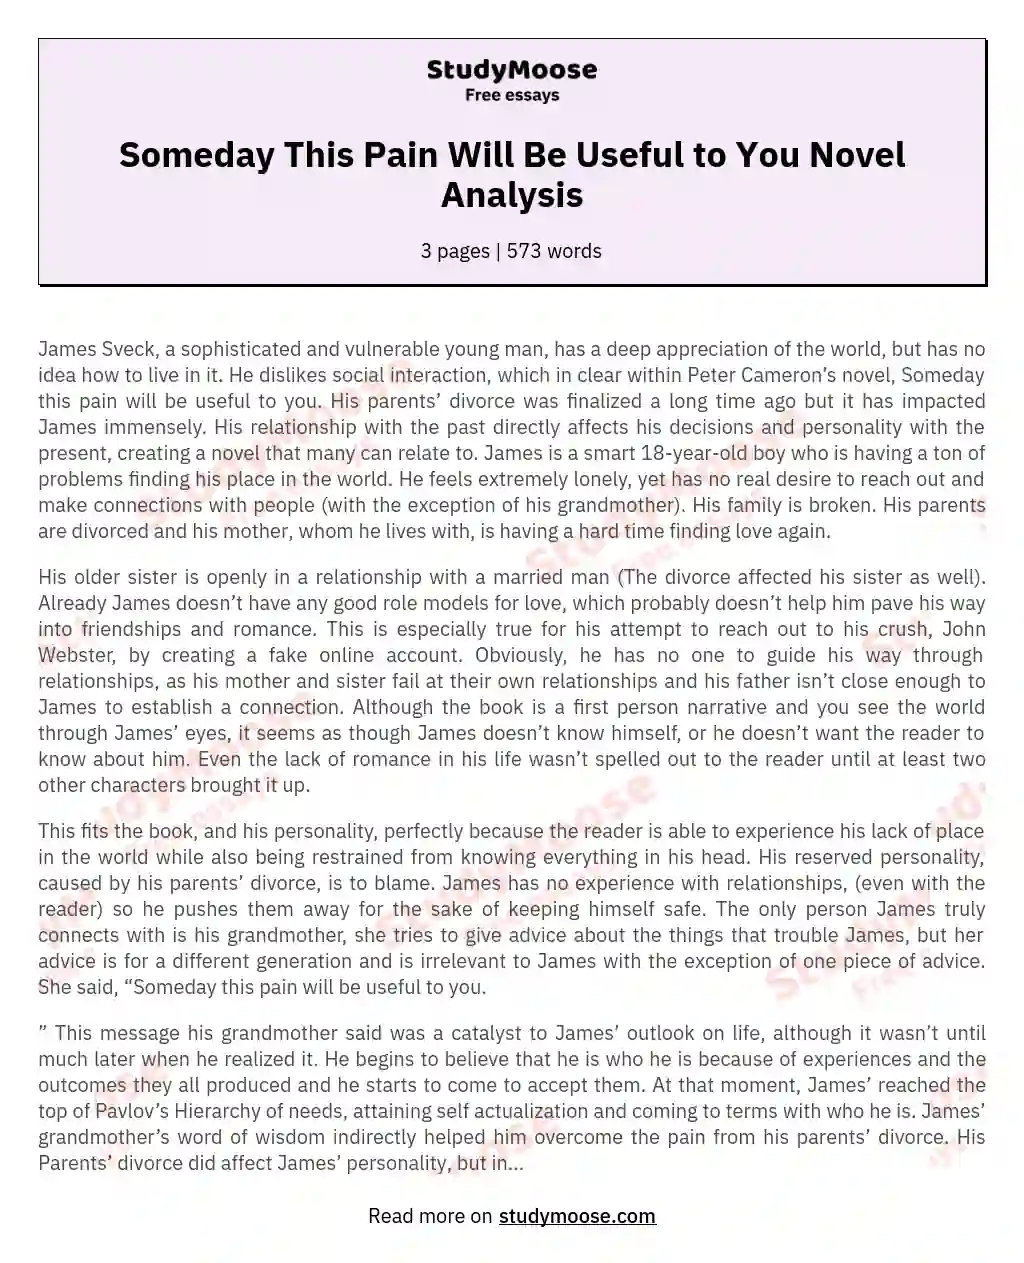 Someday This Pain Will Be Useful to You Novel Analysis